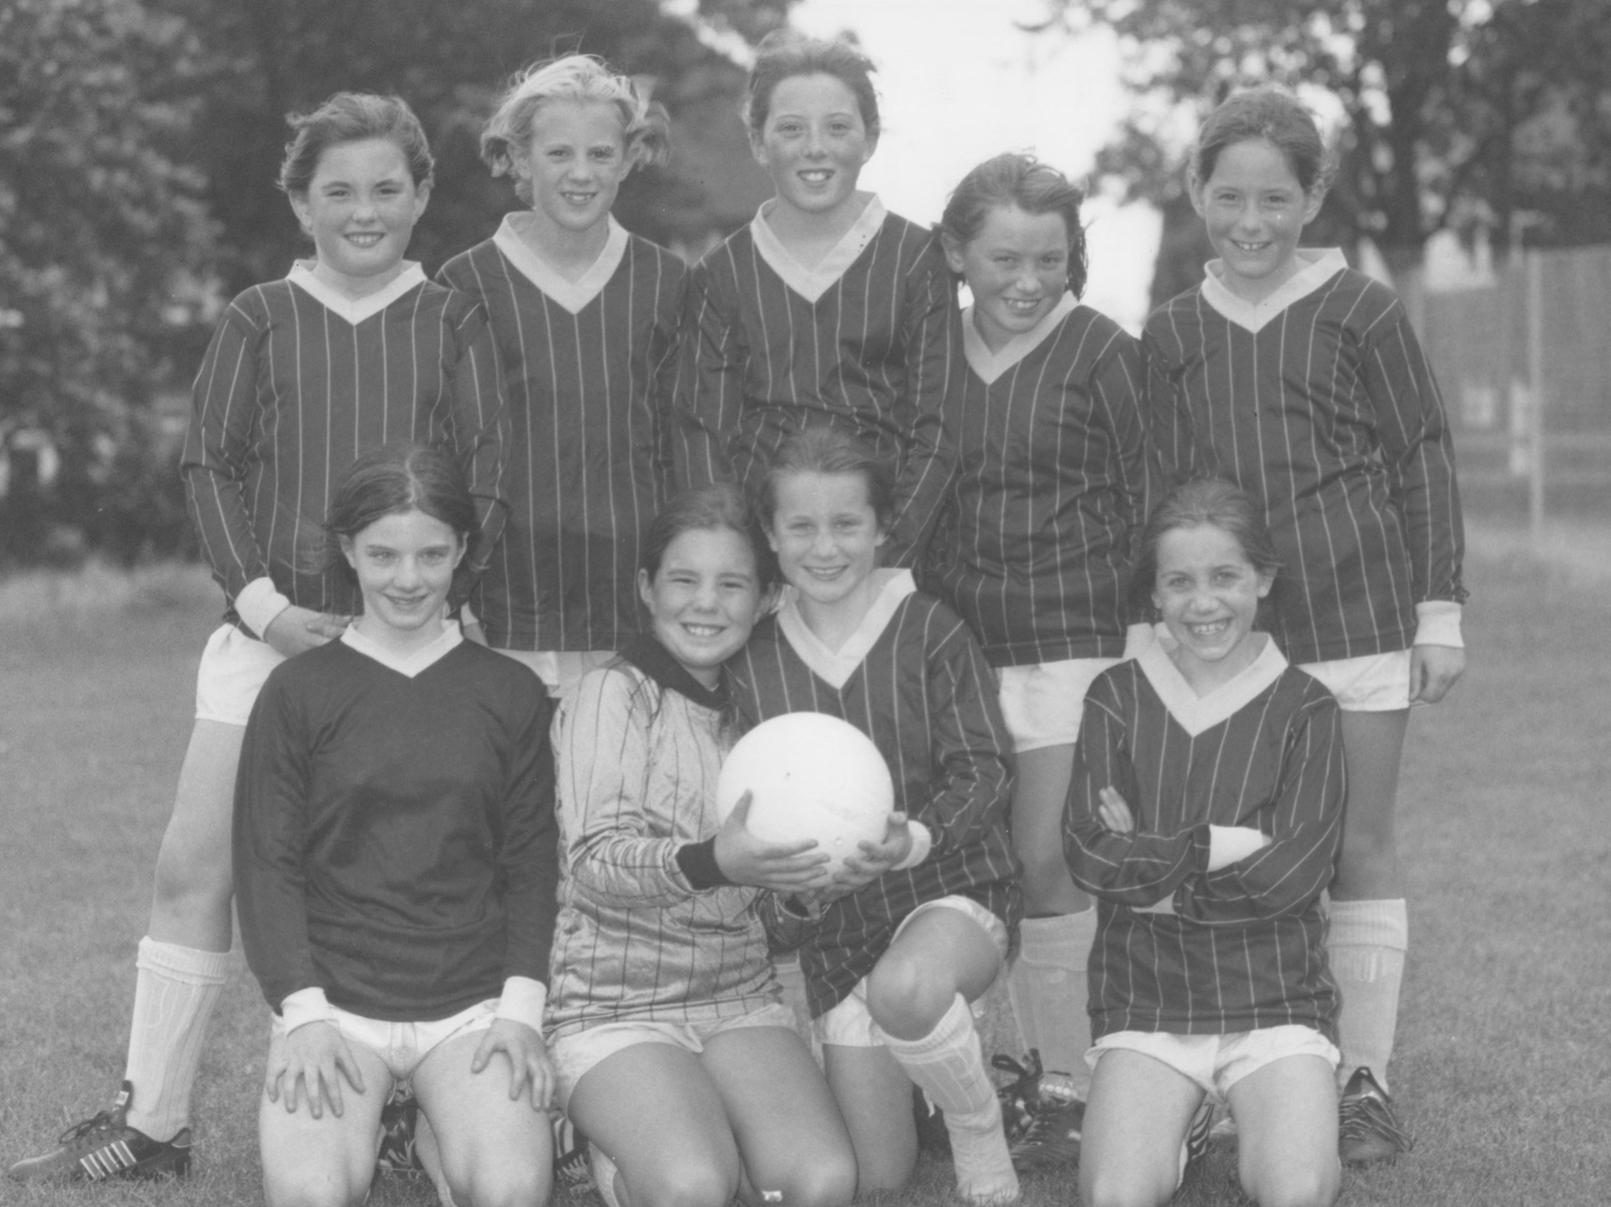 Pictured are Northstead School girls soccer team in October 1996. Back, left, Jodie Harriman, Toni Jordan, Leanne Lynch, Jenna Watts and Ruth Griffiths; front, left, Donna England, Lisa Smith, Maxine Denton and Samantha Denton.